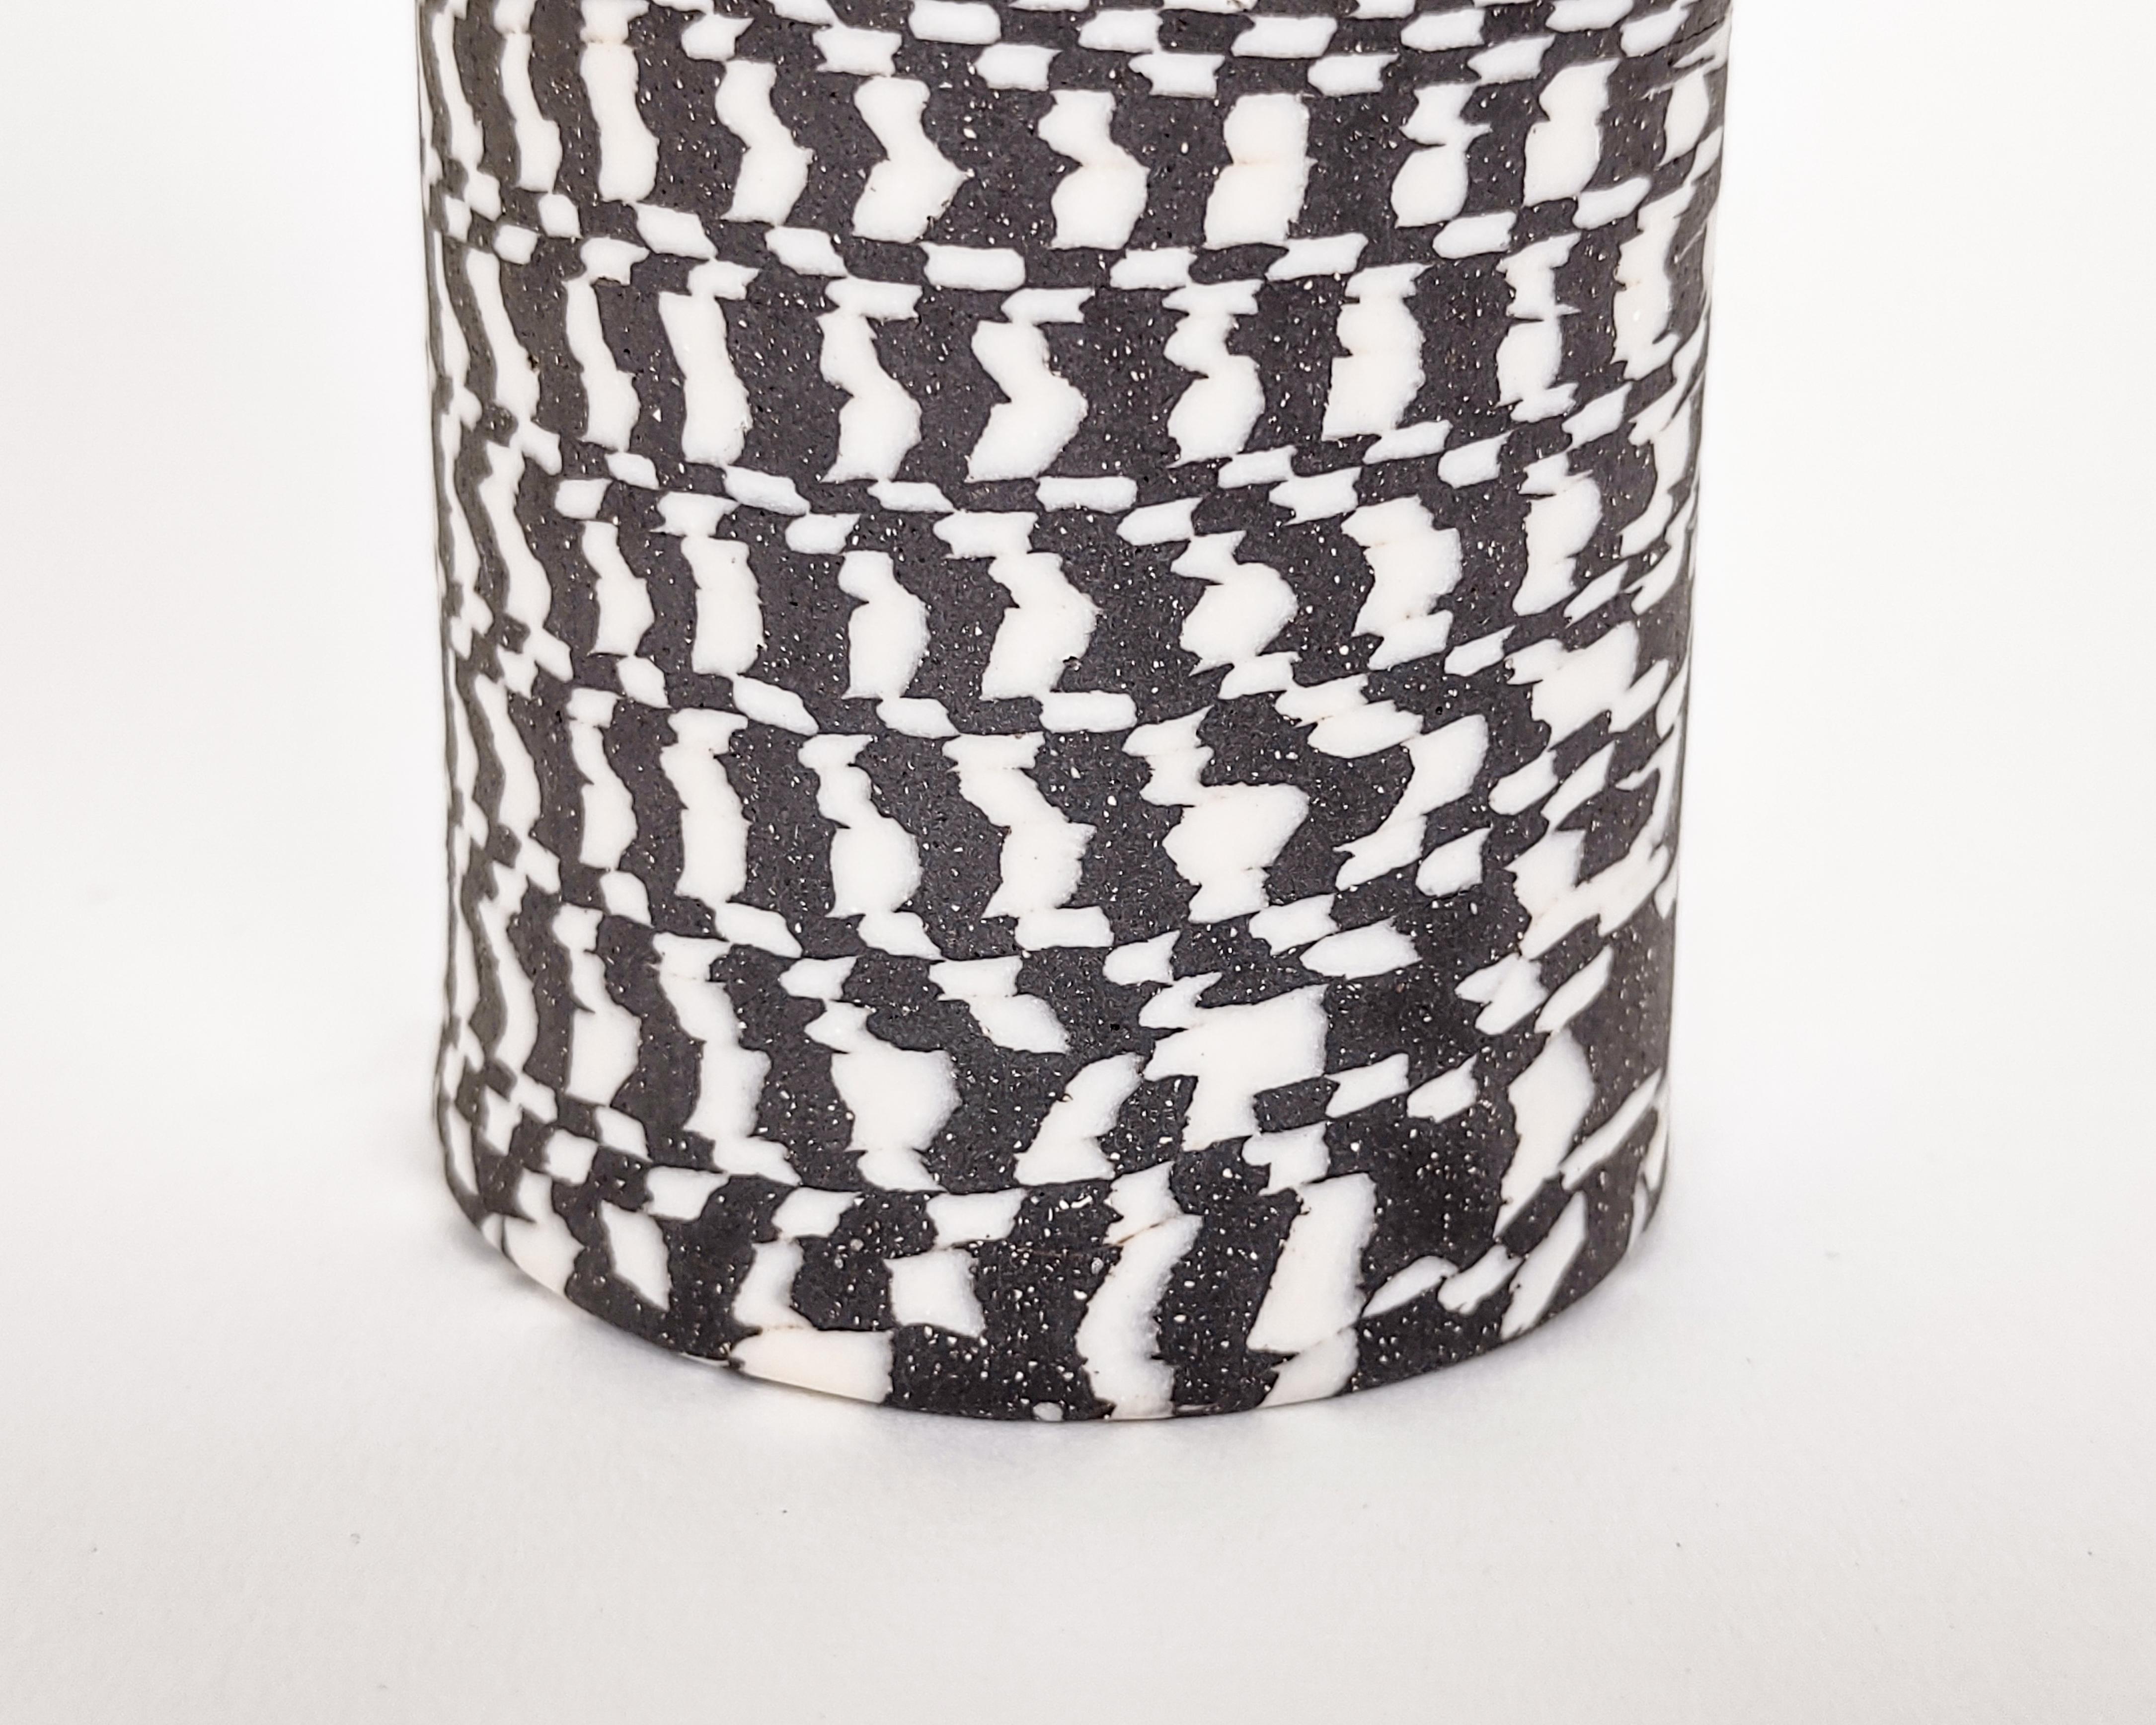 Contemporary Handmade Nerikomi Black and White Hounds -tooth Vase by Fizzy Ceramics For Sale